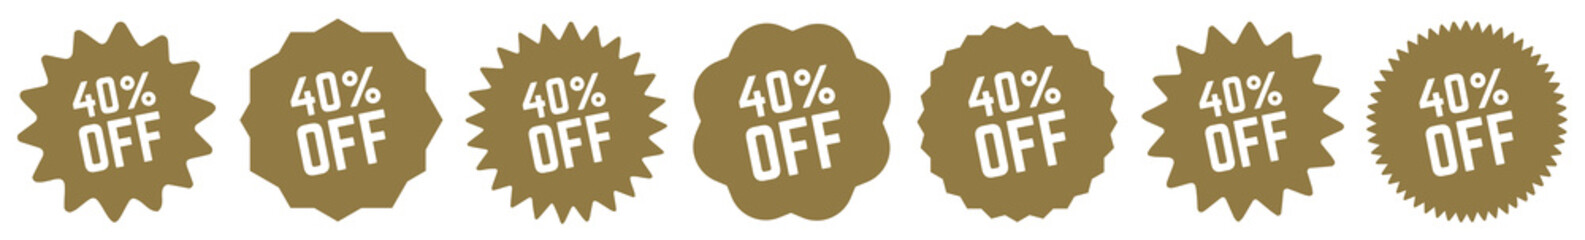 40 Percent OFF Discount Tag Gold | Special Offer Icon | Sale Sticker | Deal Label | Variations